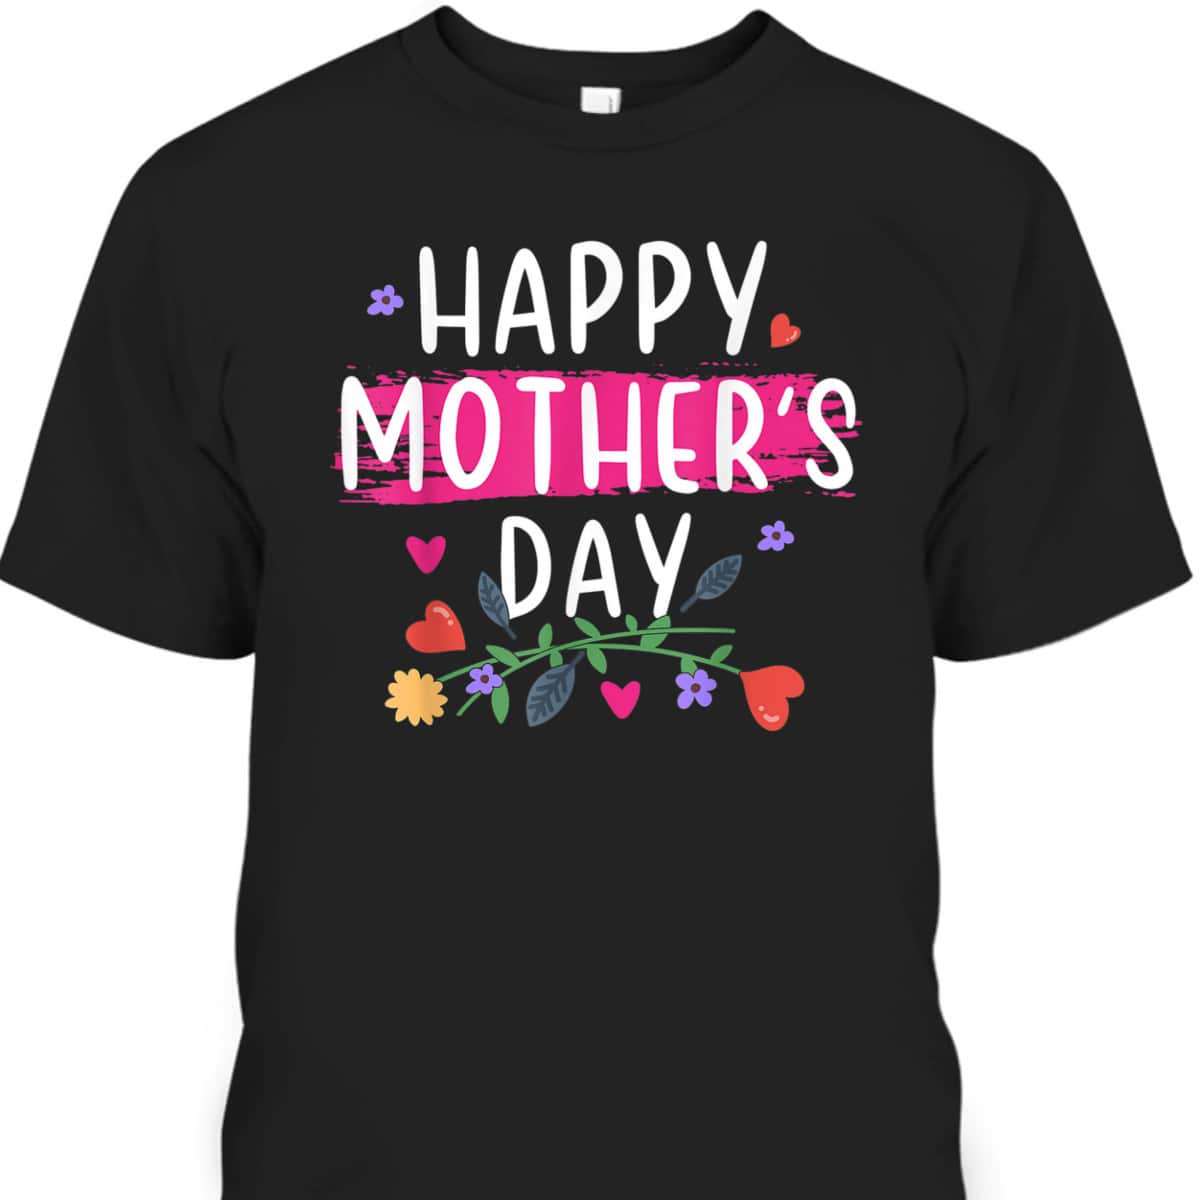 Happy Mother's Day T-Shirt Gift For Mother-In-Law